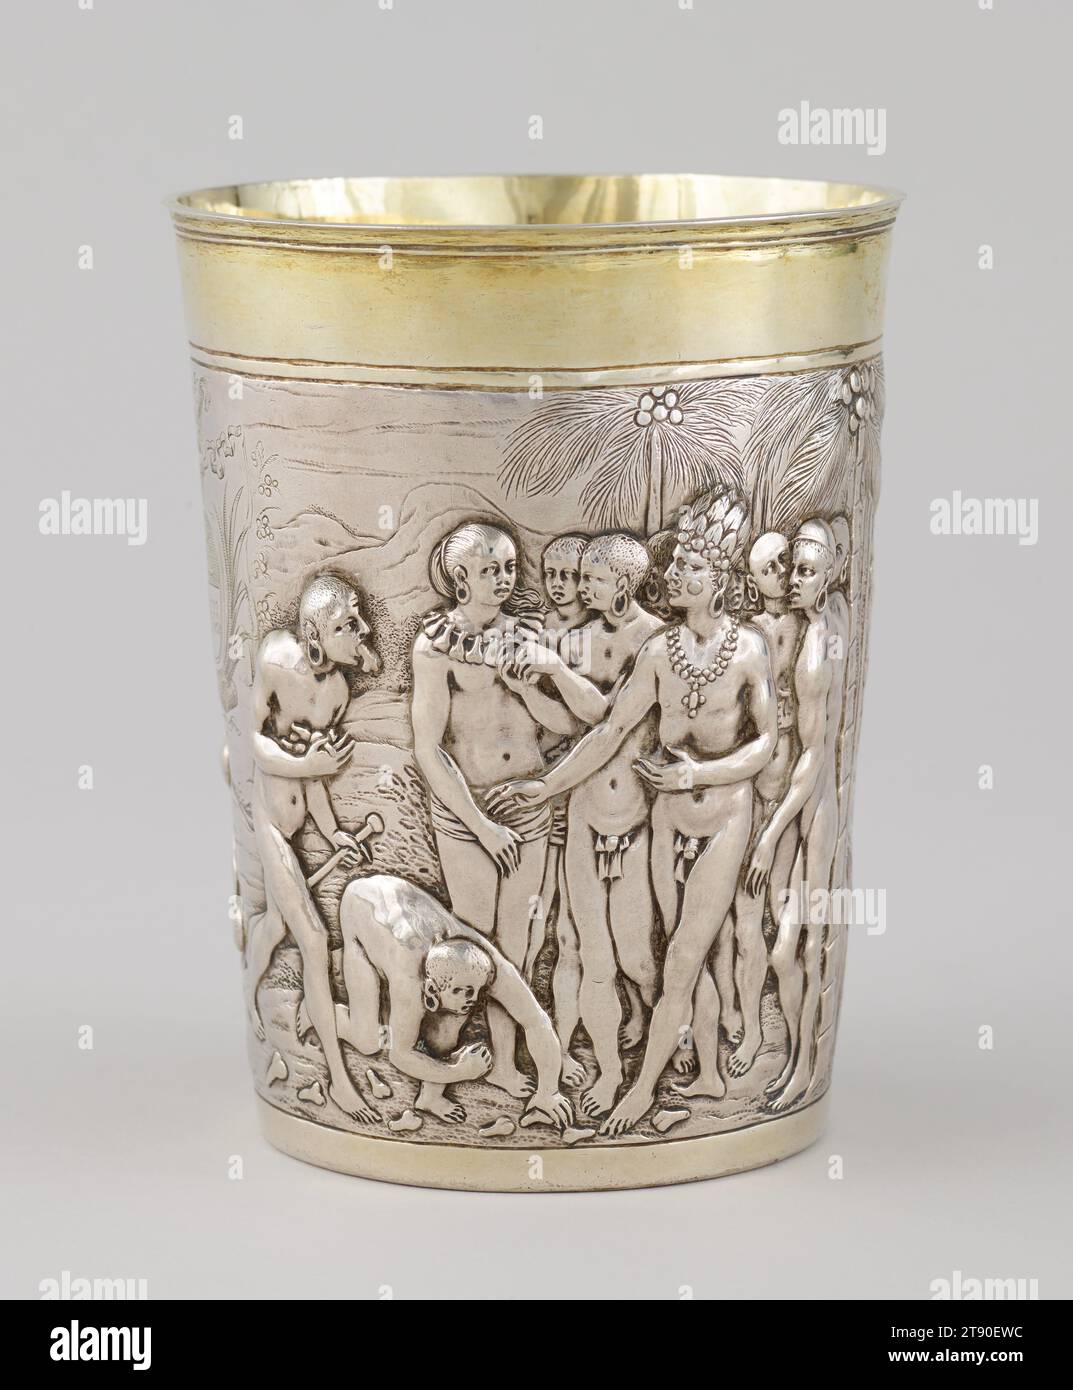 Beaker, 1647-1650, Melchior Lauch, German, documented 1622 - 1659, 5 1/2 × 4 7/8 × 4 7/8 in. (14 × 12.38 × 12.38 cm), Silver, gilt, Germany, 17th century, This beaker depicts the battles and warfare of different tribes in Mozambique, as described and imagined by the Dutch merchant Jan Huyghen van Linschoten (1563-1611), who had lived in Goa, India, for six years, and wrote an influential account of his travels through Africa and India. It was made in Leipzig, Germany, which was a center of trade, based on engravings in Jan Huyghen’s book. Such depictions of exotic peoples in faraway places Stock Photo